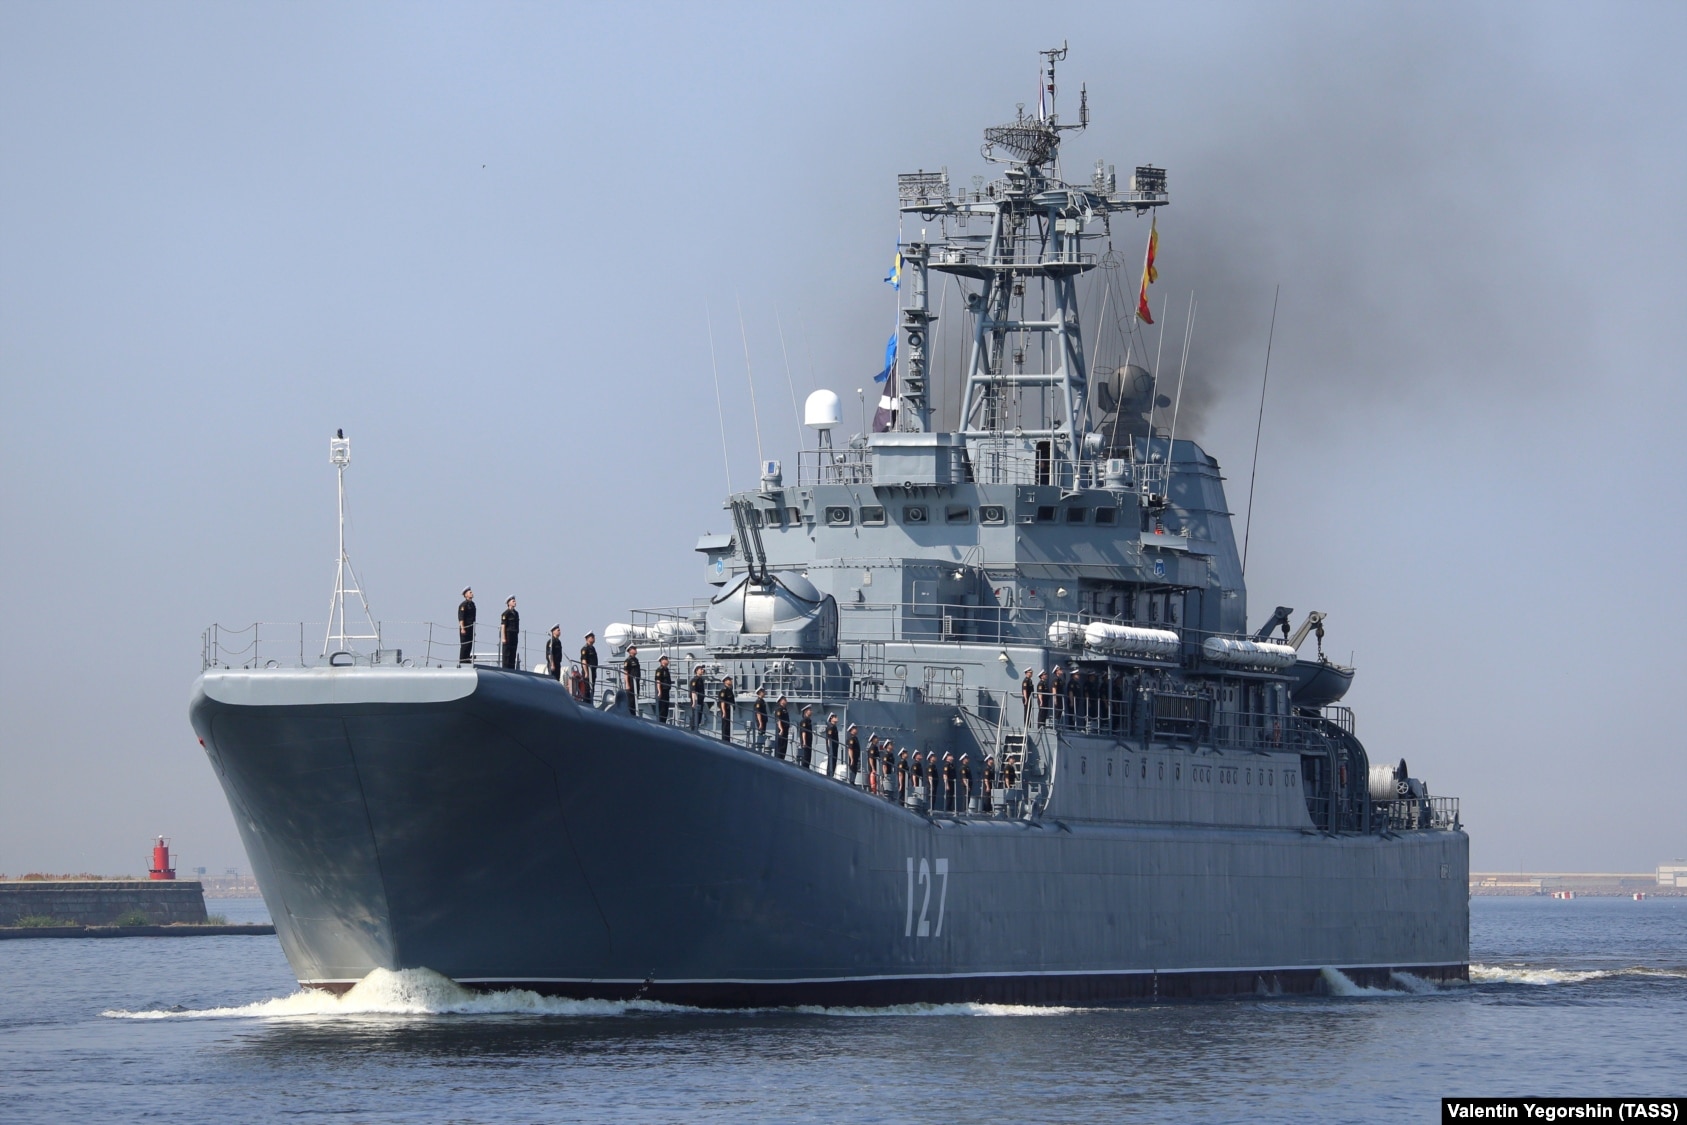 Russia&rsquo;s Minsk, a Ropucha-class landing craft, cruises off the coast of St. Petersburg in July 2021.&nbsp;&nbsp; &nbsp; In September 2023, several missiles struck a shipyard in the Sevastopol naval base in Russian-occupied Crimea. According to Britain&#39;s Defense&nbsp;Ministry, the Minsk was almost certainly &quot;functionally destroyed&quot; in the strike. Photos of the aftermath showed the ship smoldering and severely damaged.&nbsp;&nbsp; &nbsp; The Minsk was built in Poland in 1983 and designed with a pop-open bow that could disgorge as many as 25 armored personnel carriers onto a beachhead.&nbsp;&nbsp; 